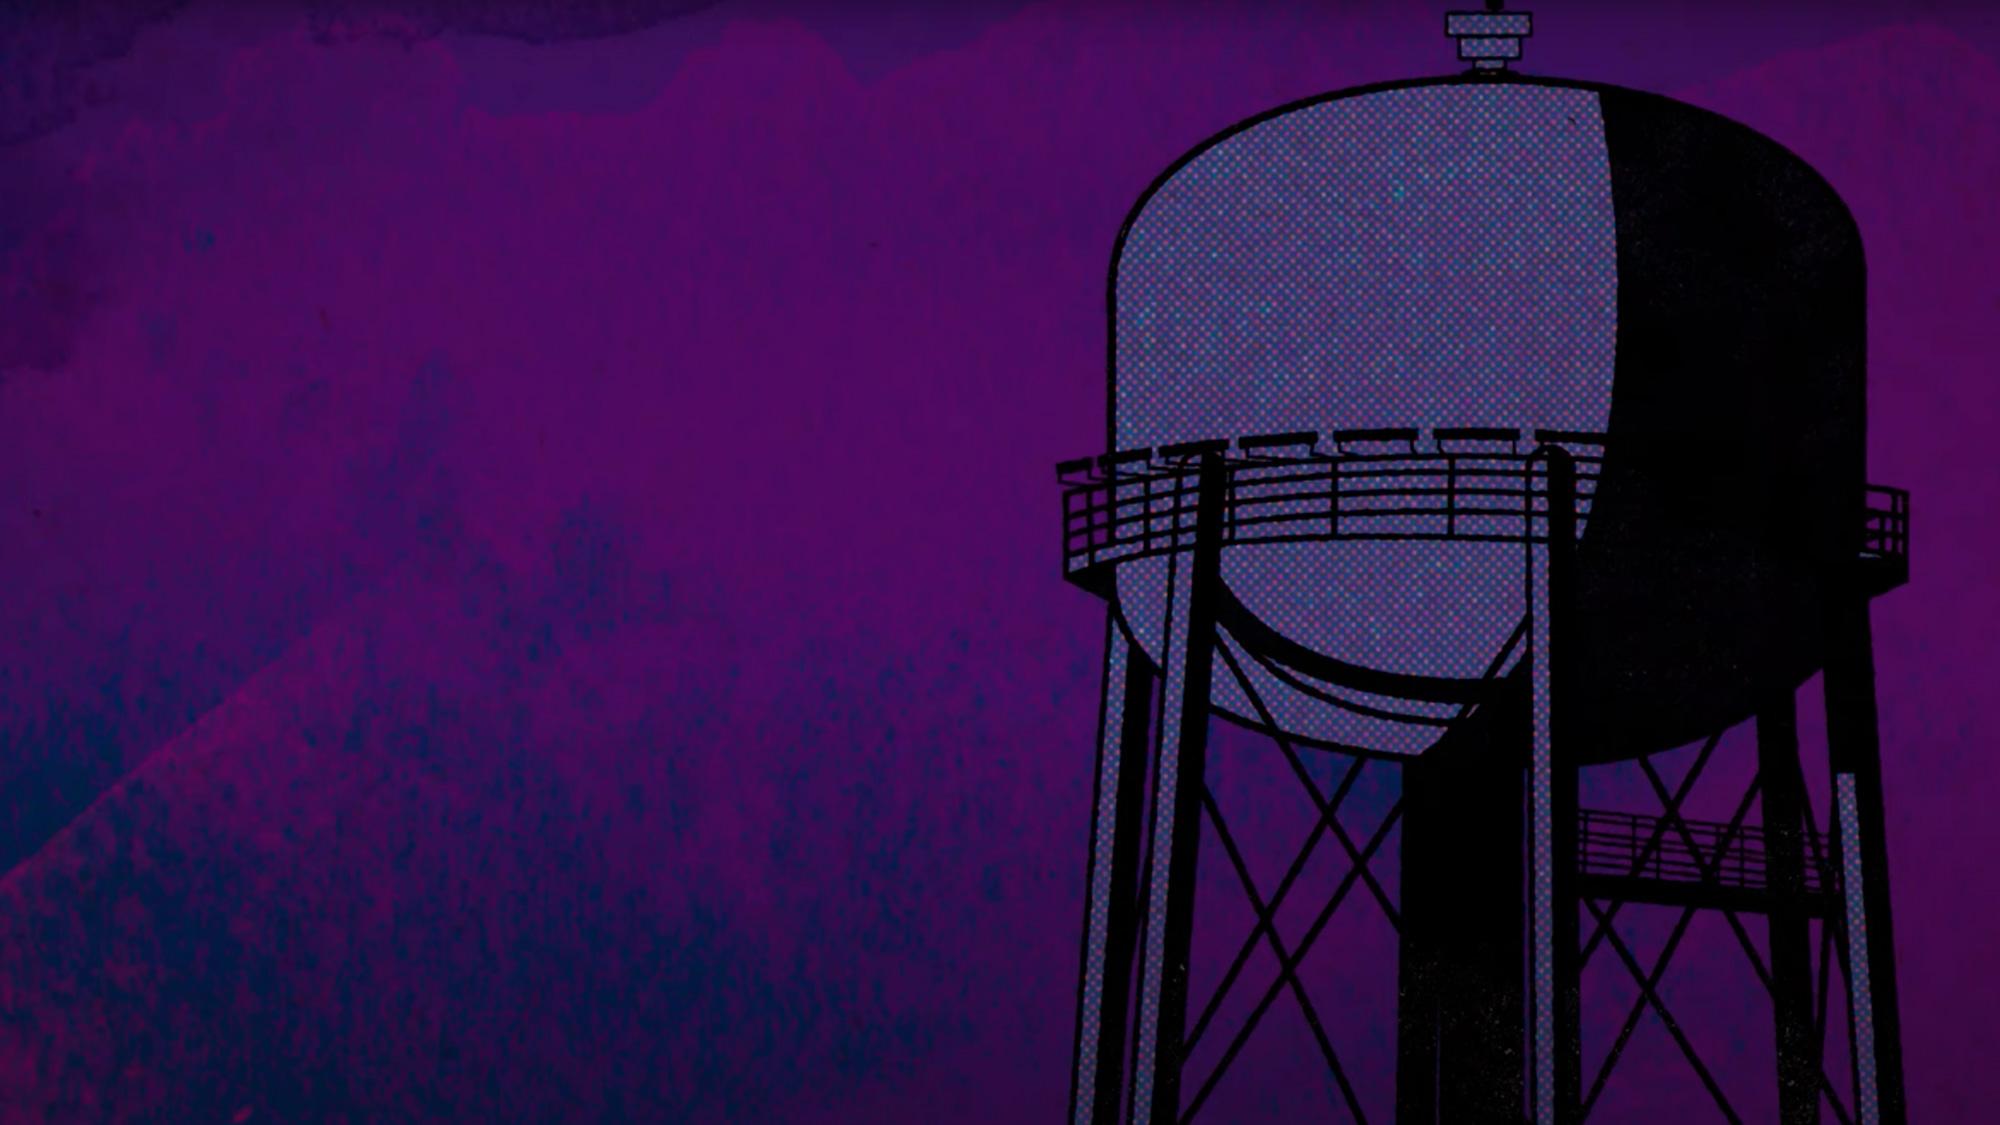 A comic book style illustration of the TV water tower